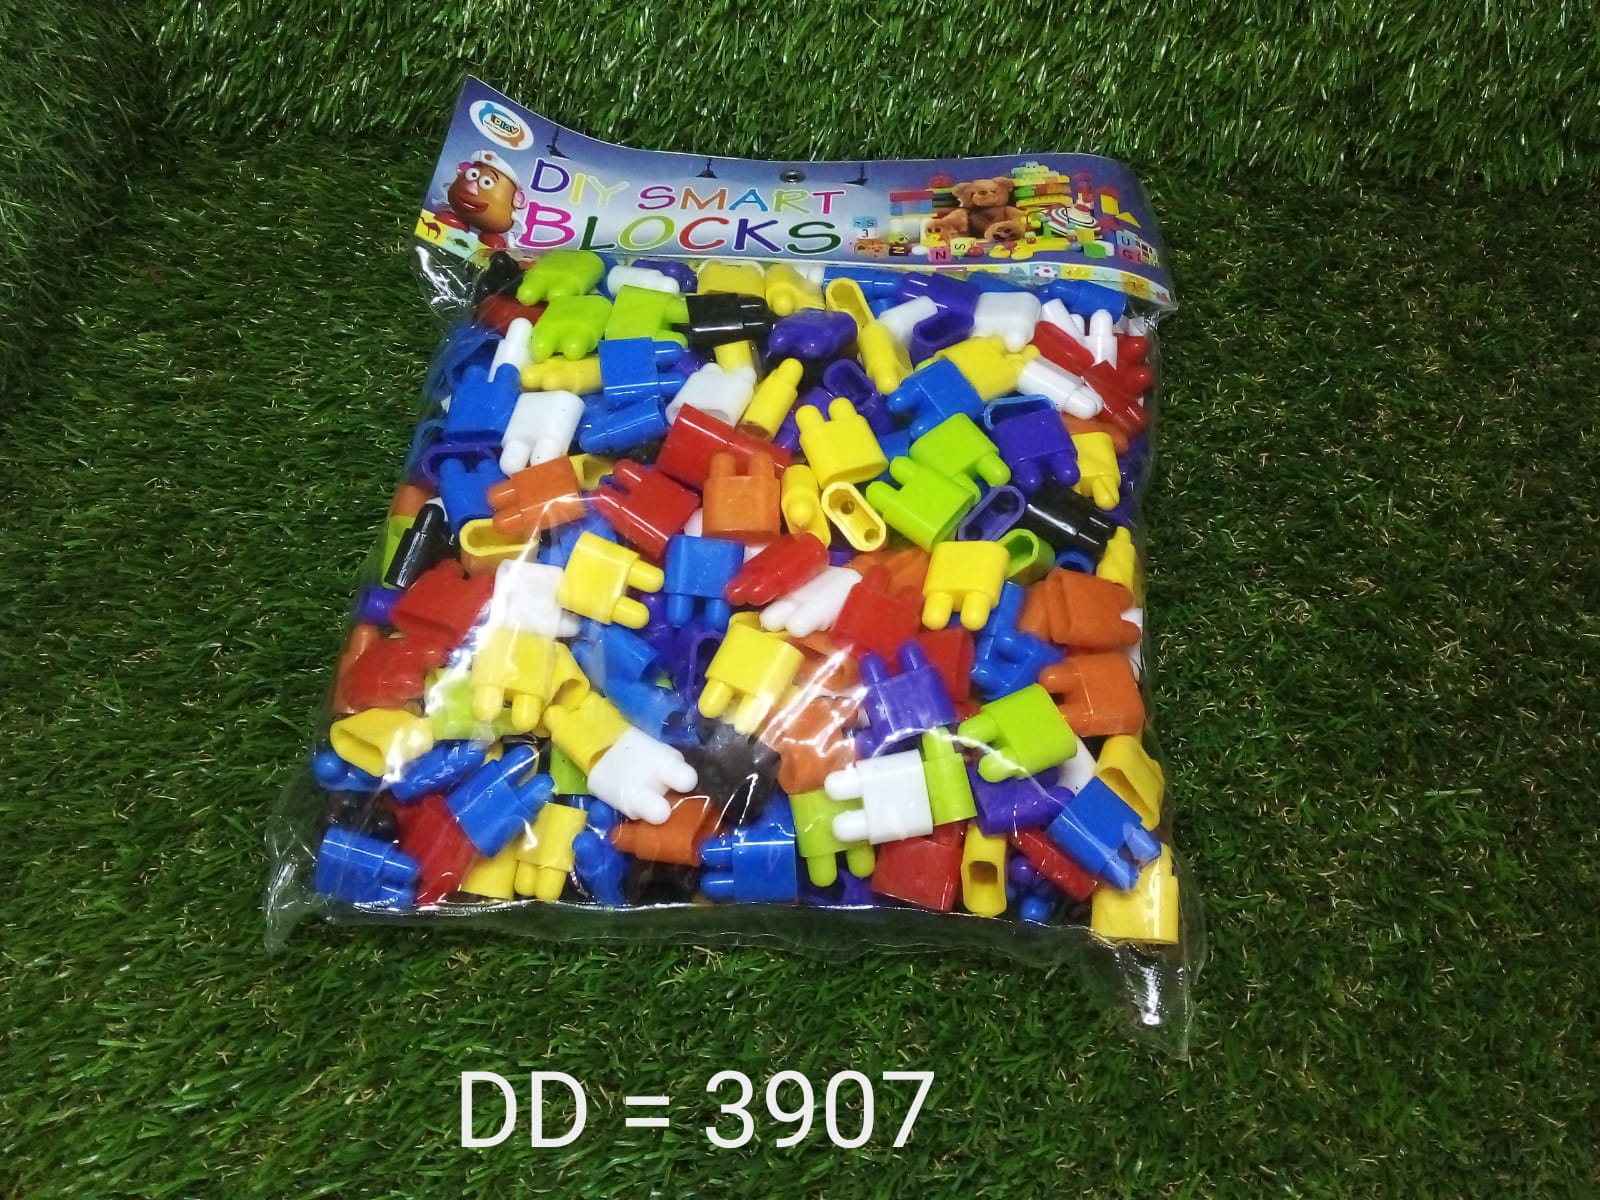 3907 400 Pc Bullet Toy used in all kinds of household and official places by kids and children's specially for playing and enjoying purposes. DeoDap